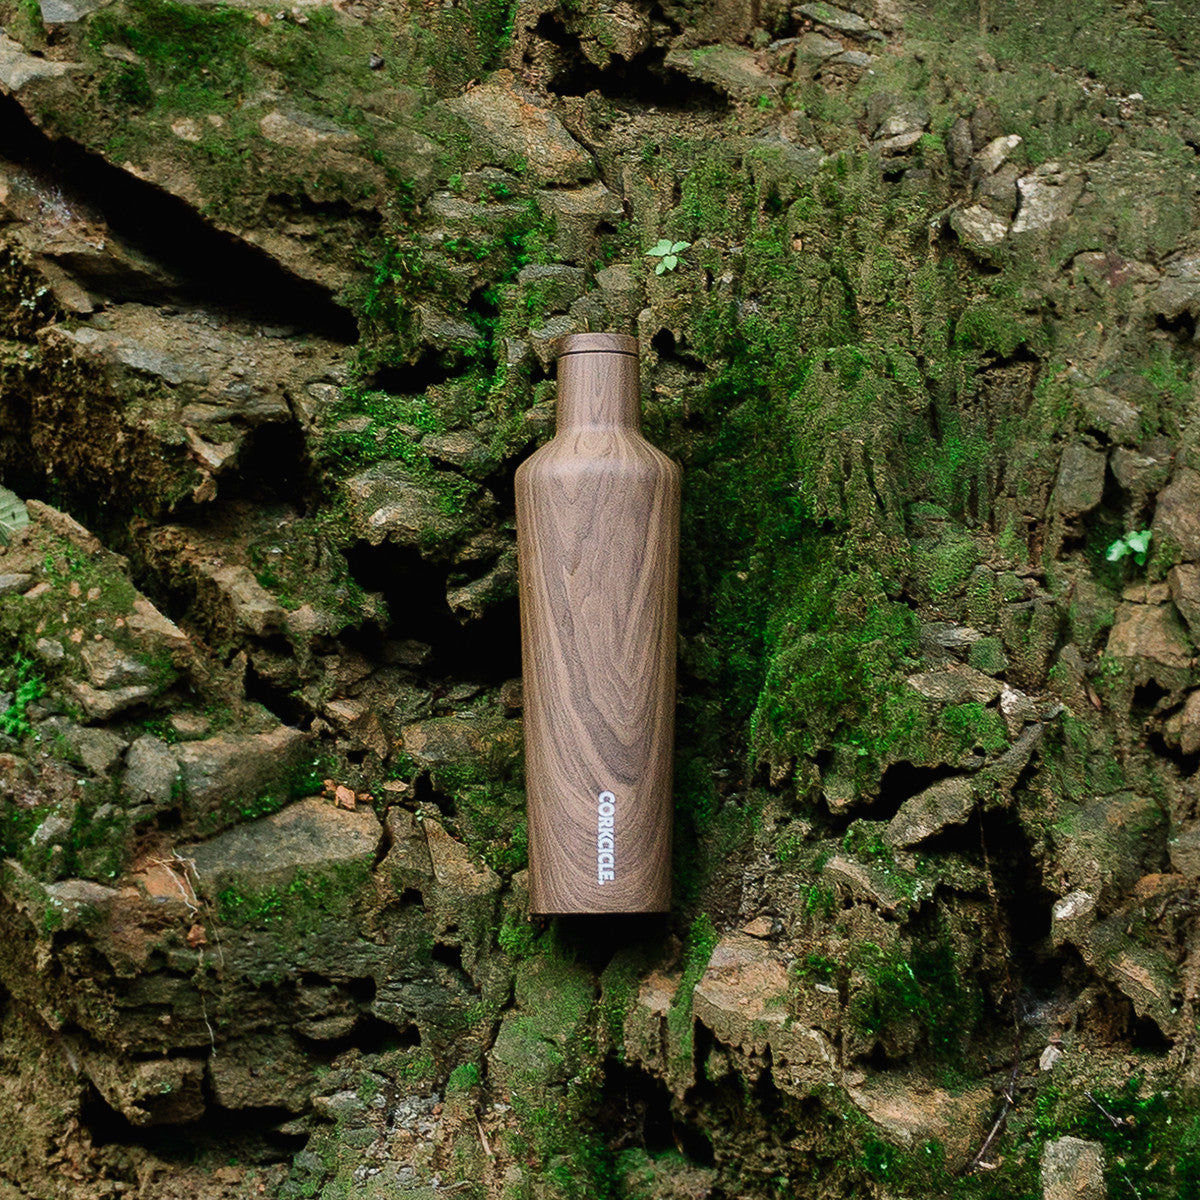 Corkcicle Origins Canteen 475ml - Walnut Wood Insulated Stainless Steel Bottle